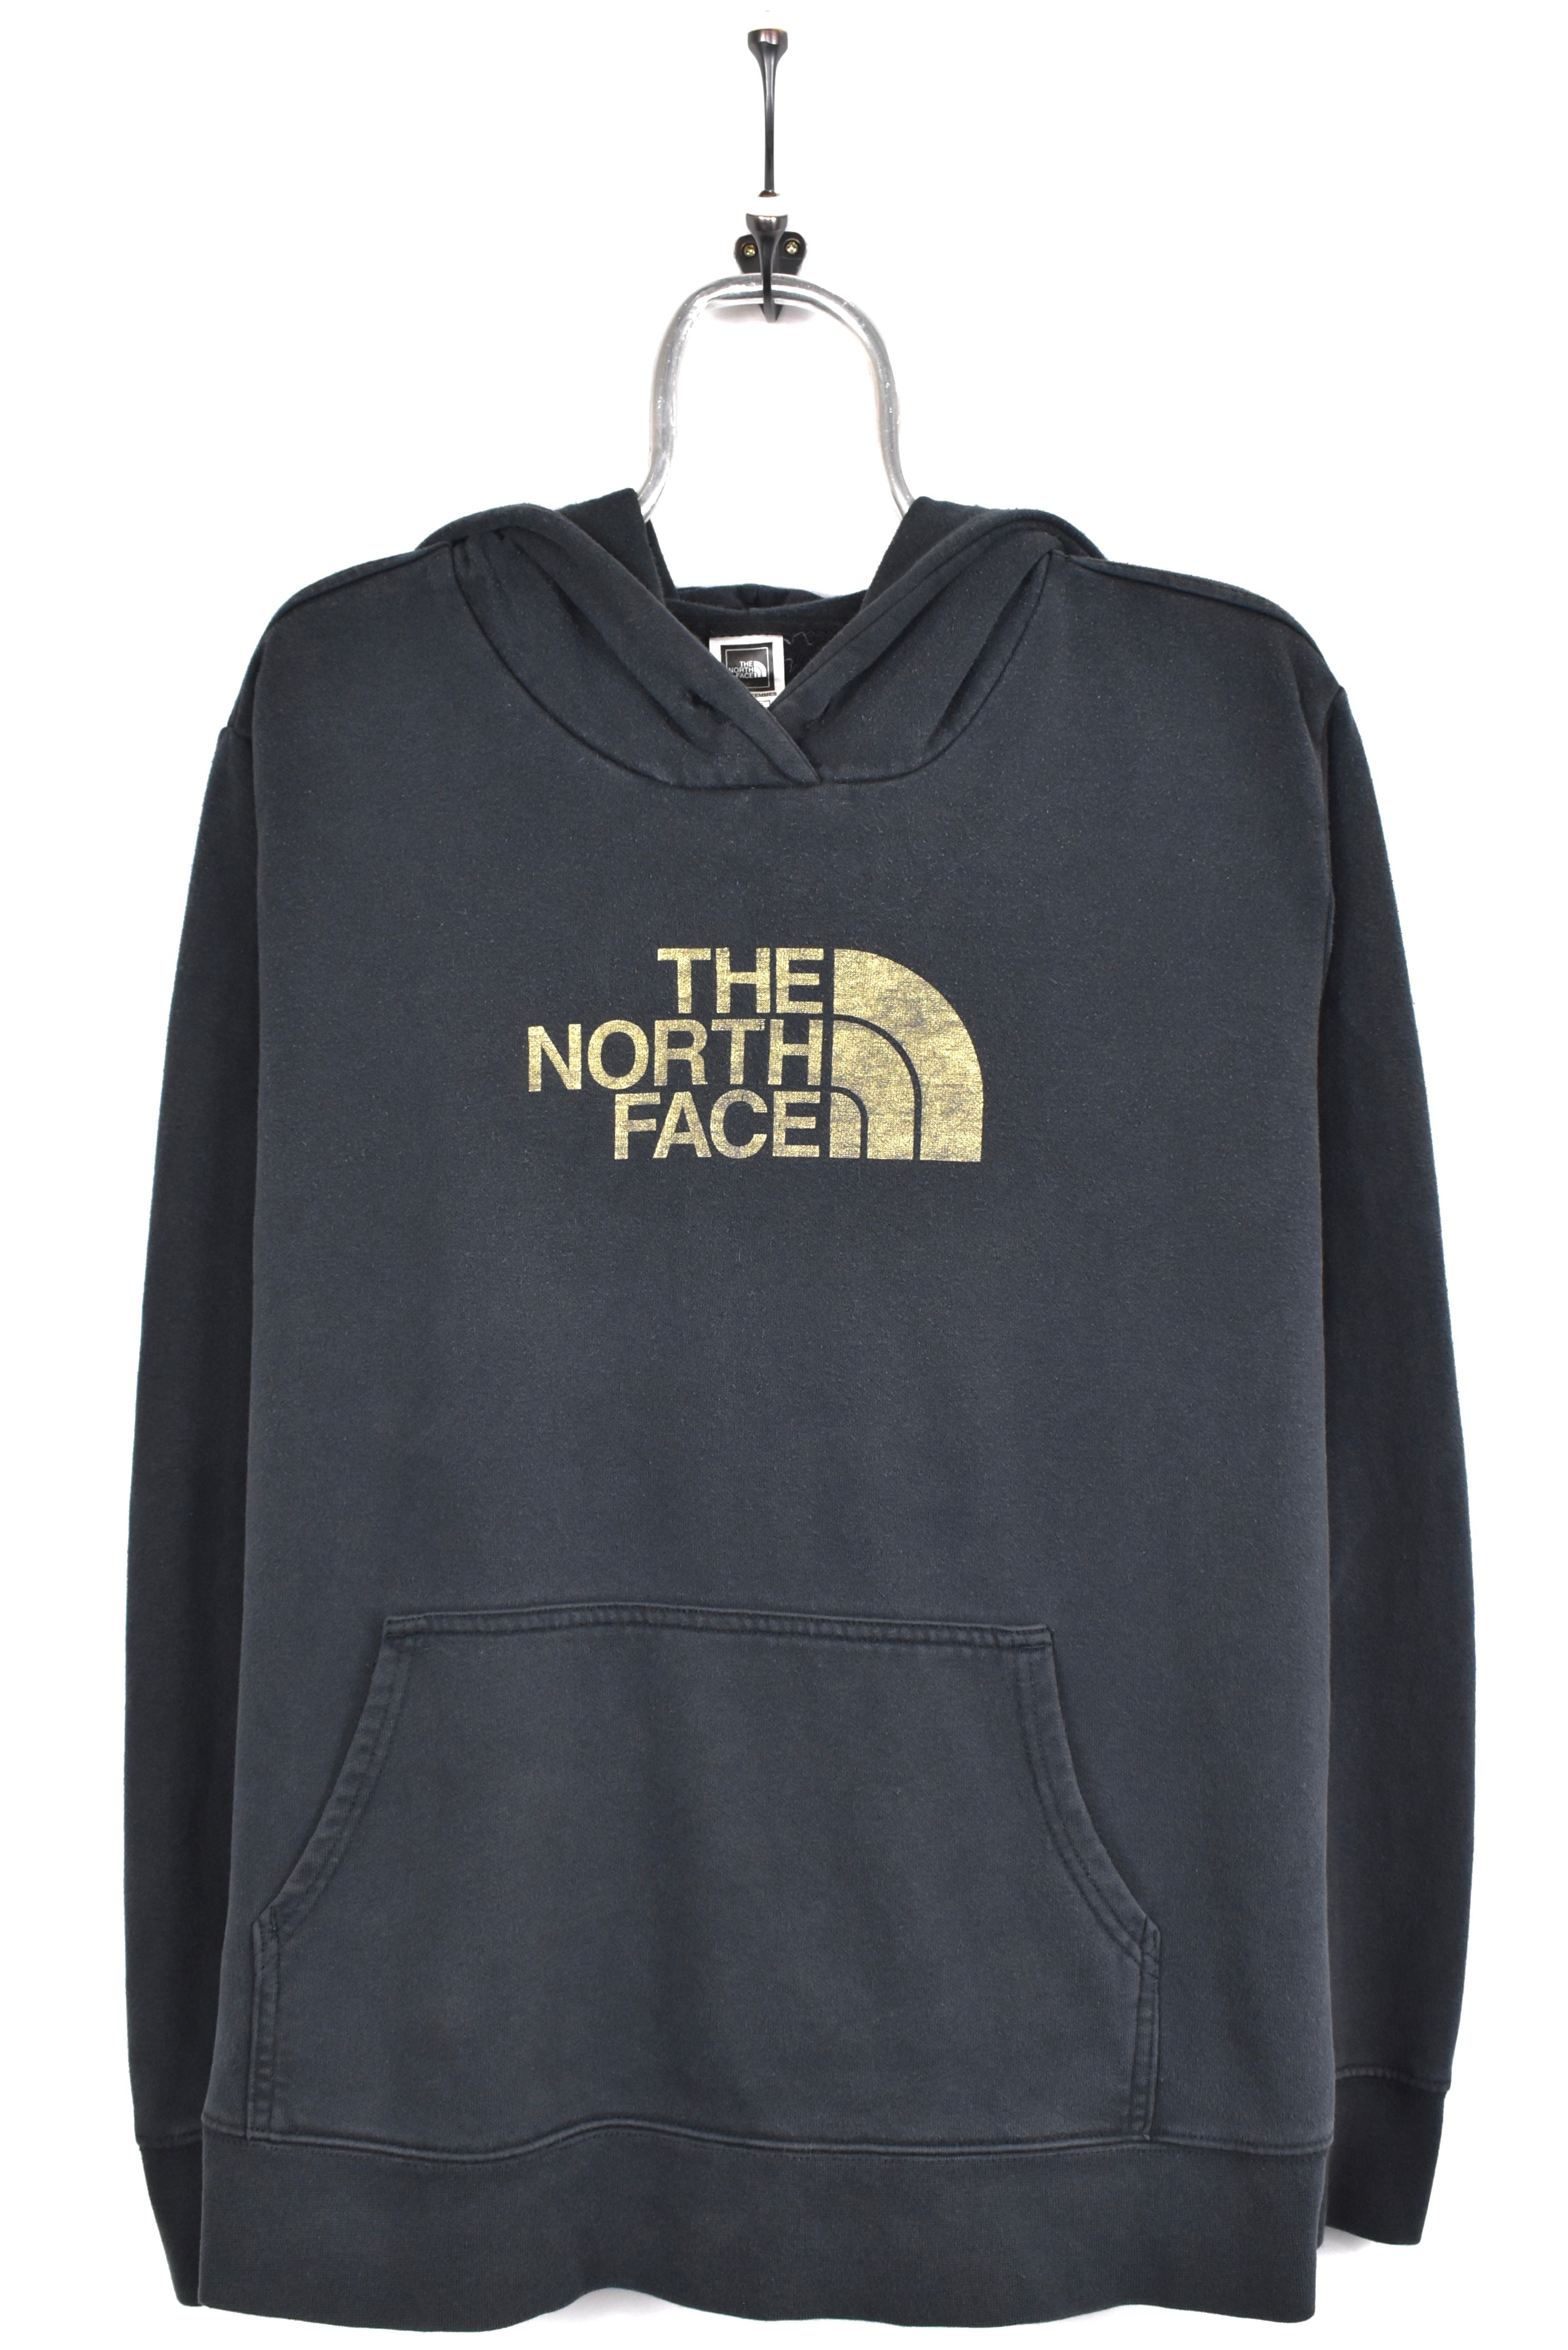 Women's Vintage The North Face hoodie, black graphic sweatshirt - AU XXL THE NORTH FACE